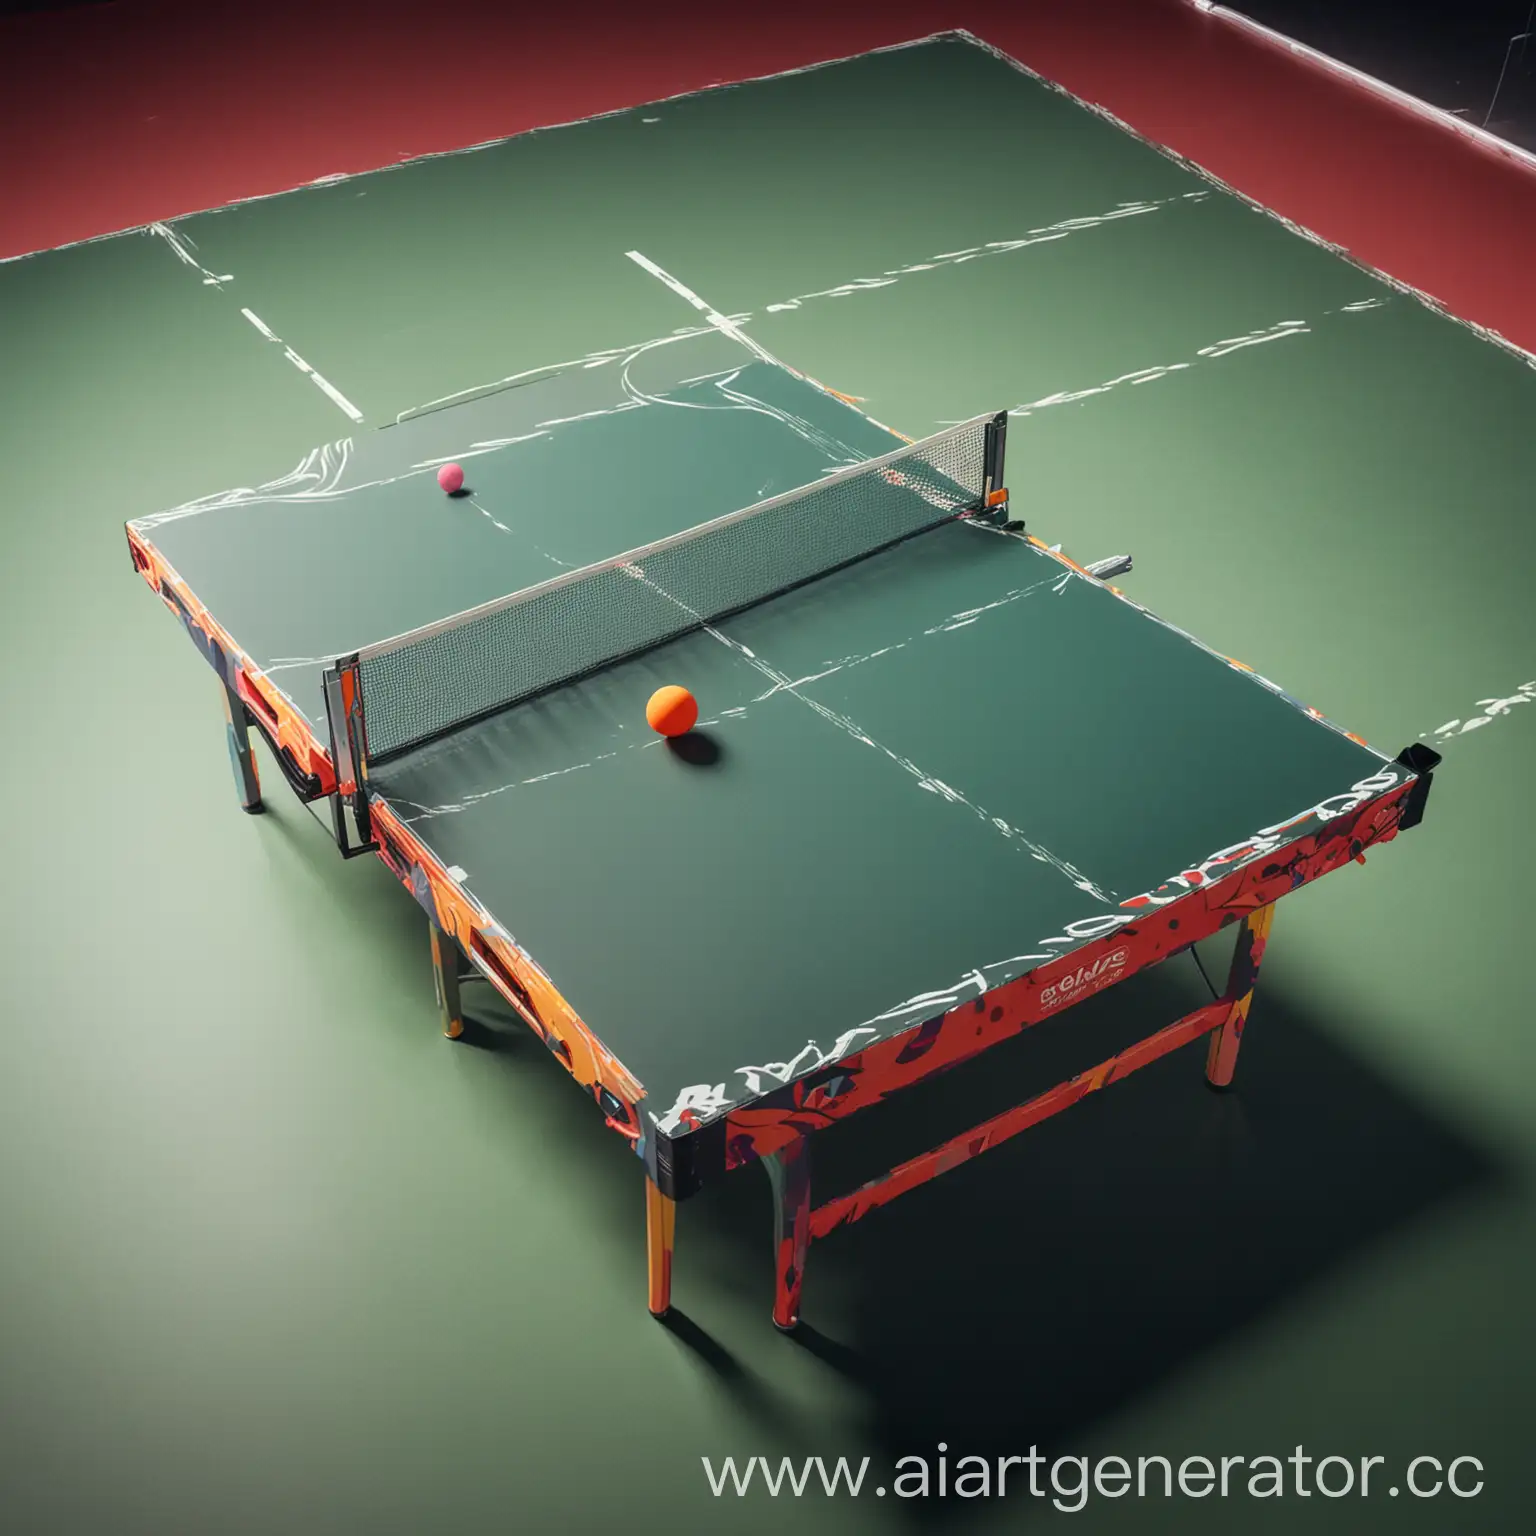 Vibrant-Table-Tennis-Table-with-Rackets-Balls-and-Net